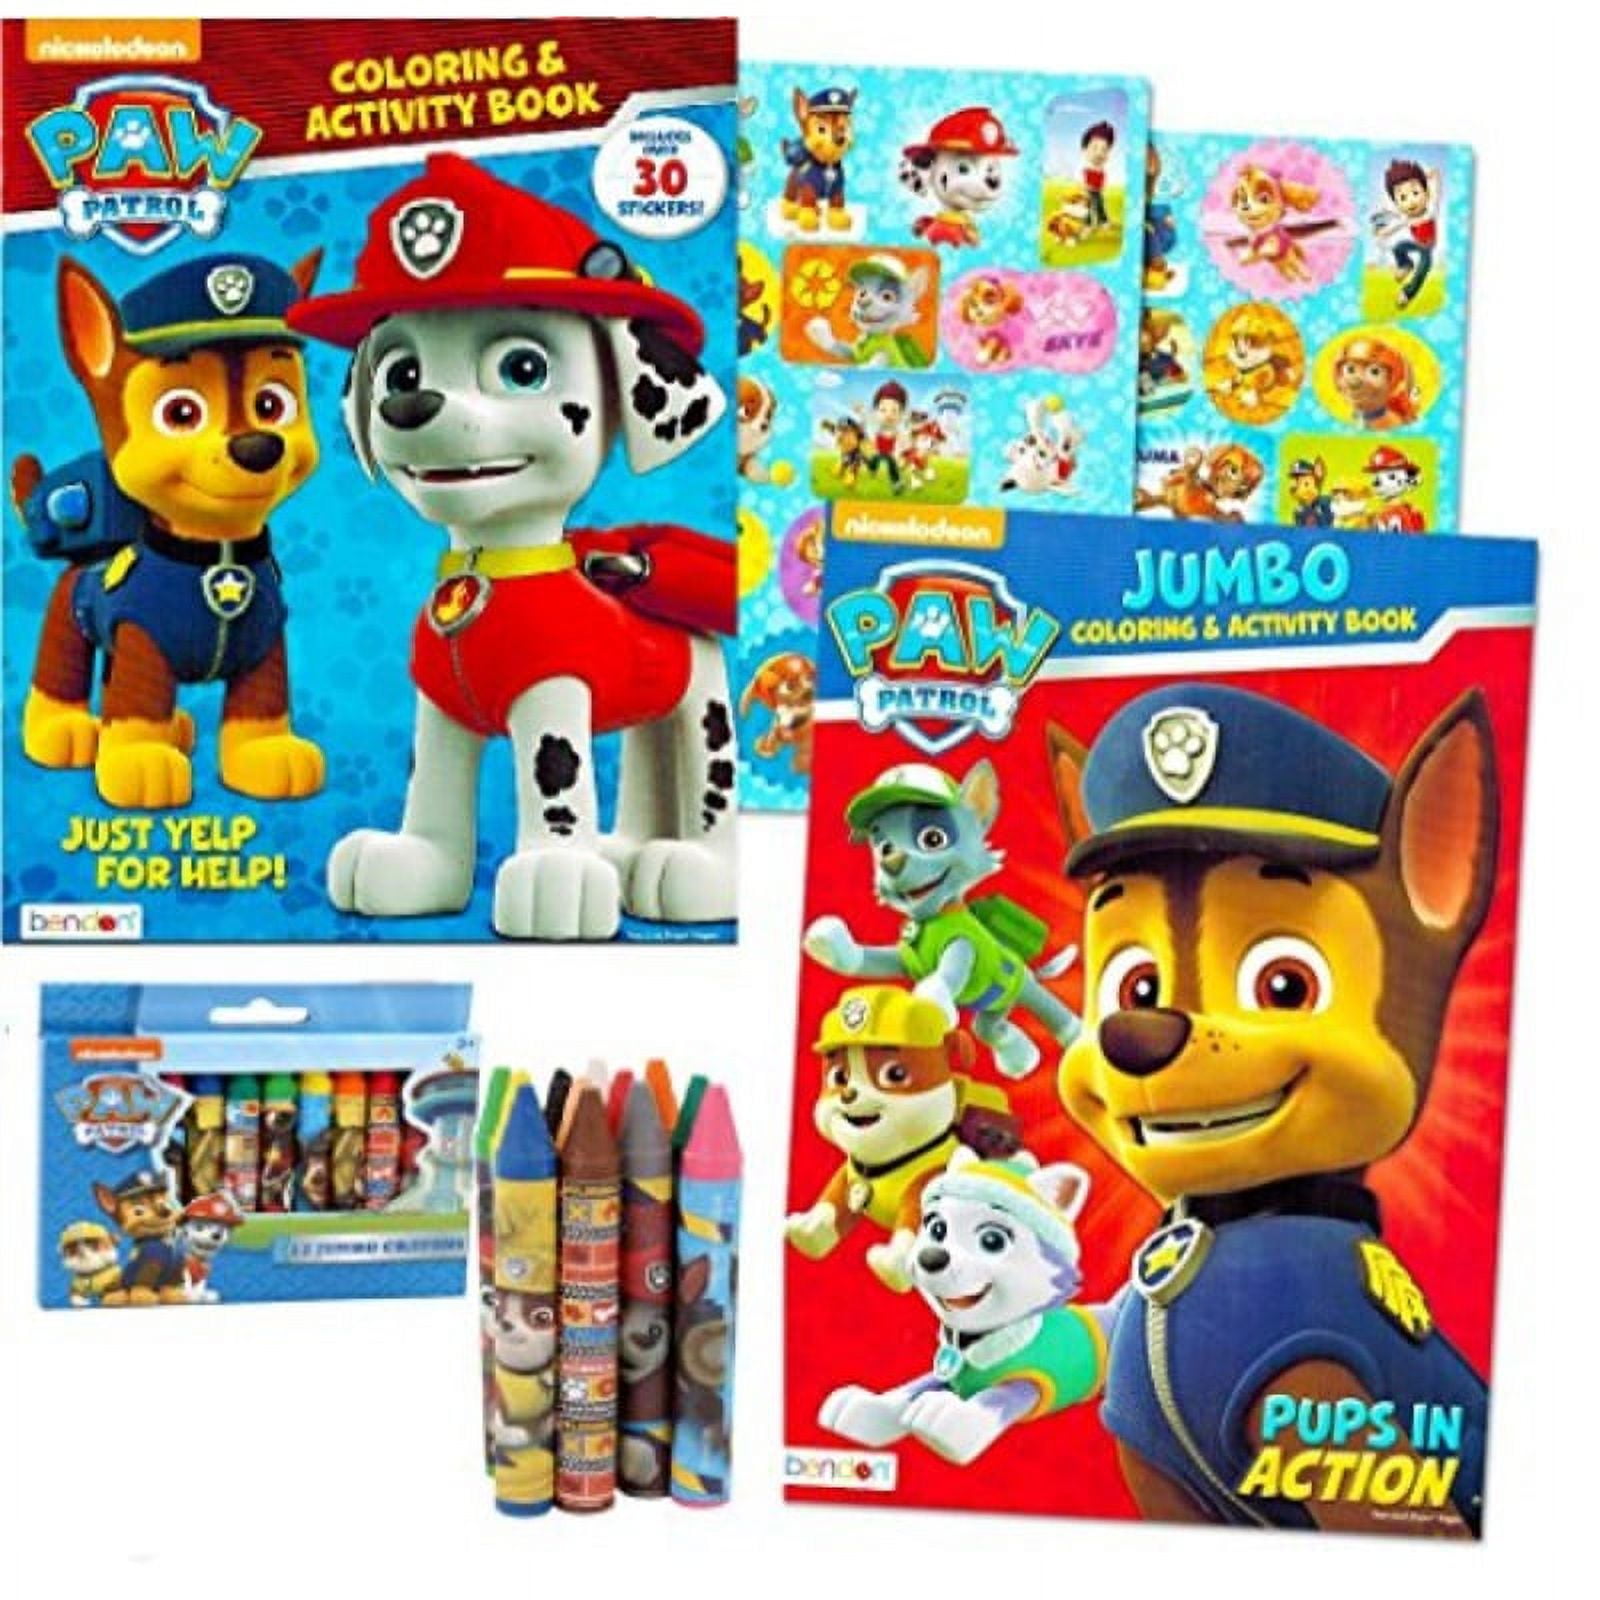 Paw Patrol Colouring Book 3432 Kids Creative Activity Toys For Ages 3+ years